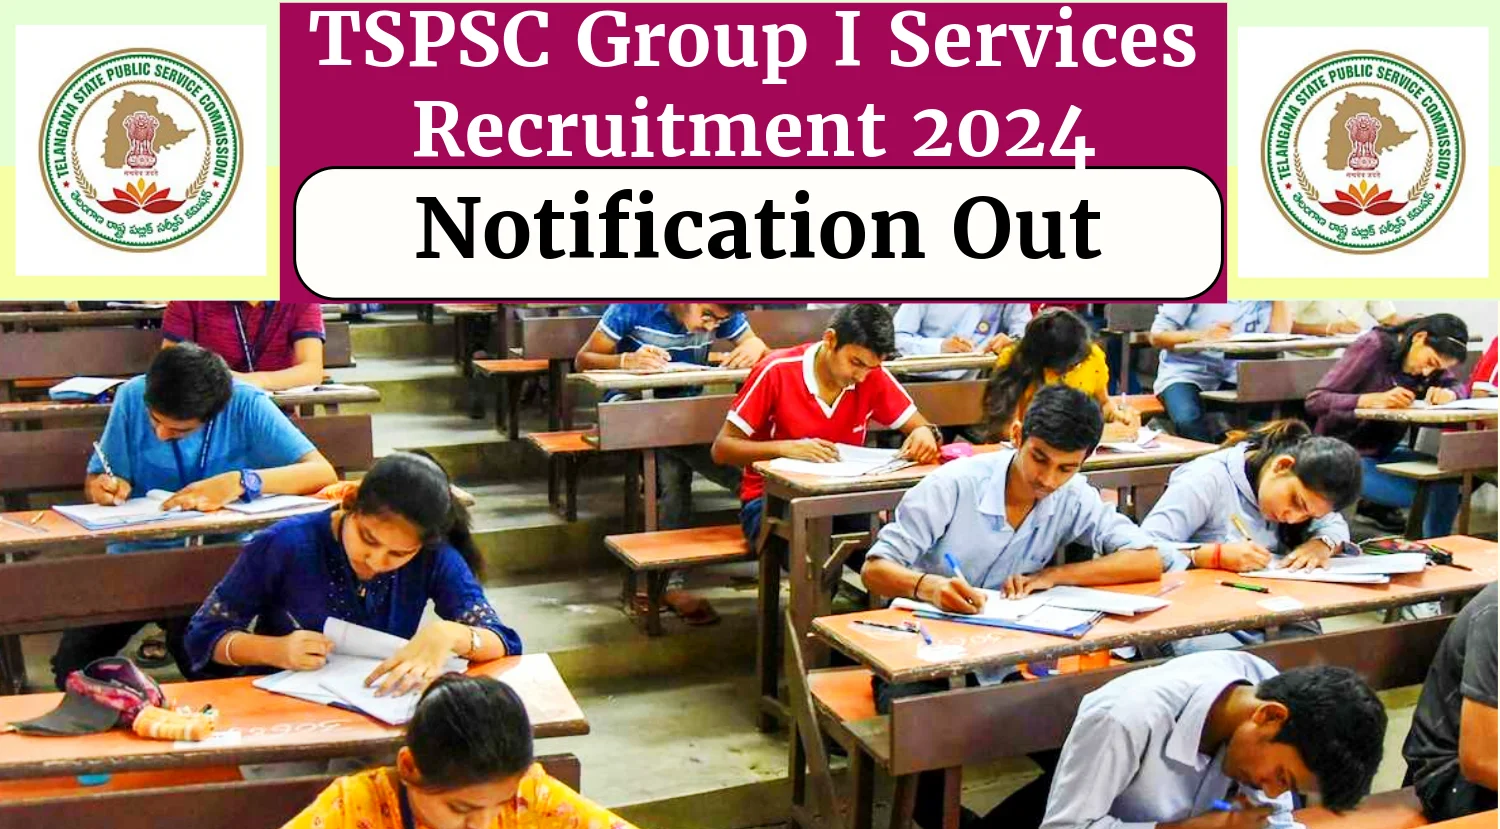 TSPSC Group I Services Recruitment 2024 Notification Out